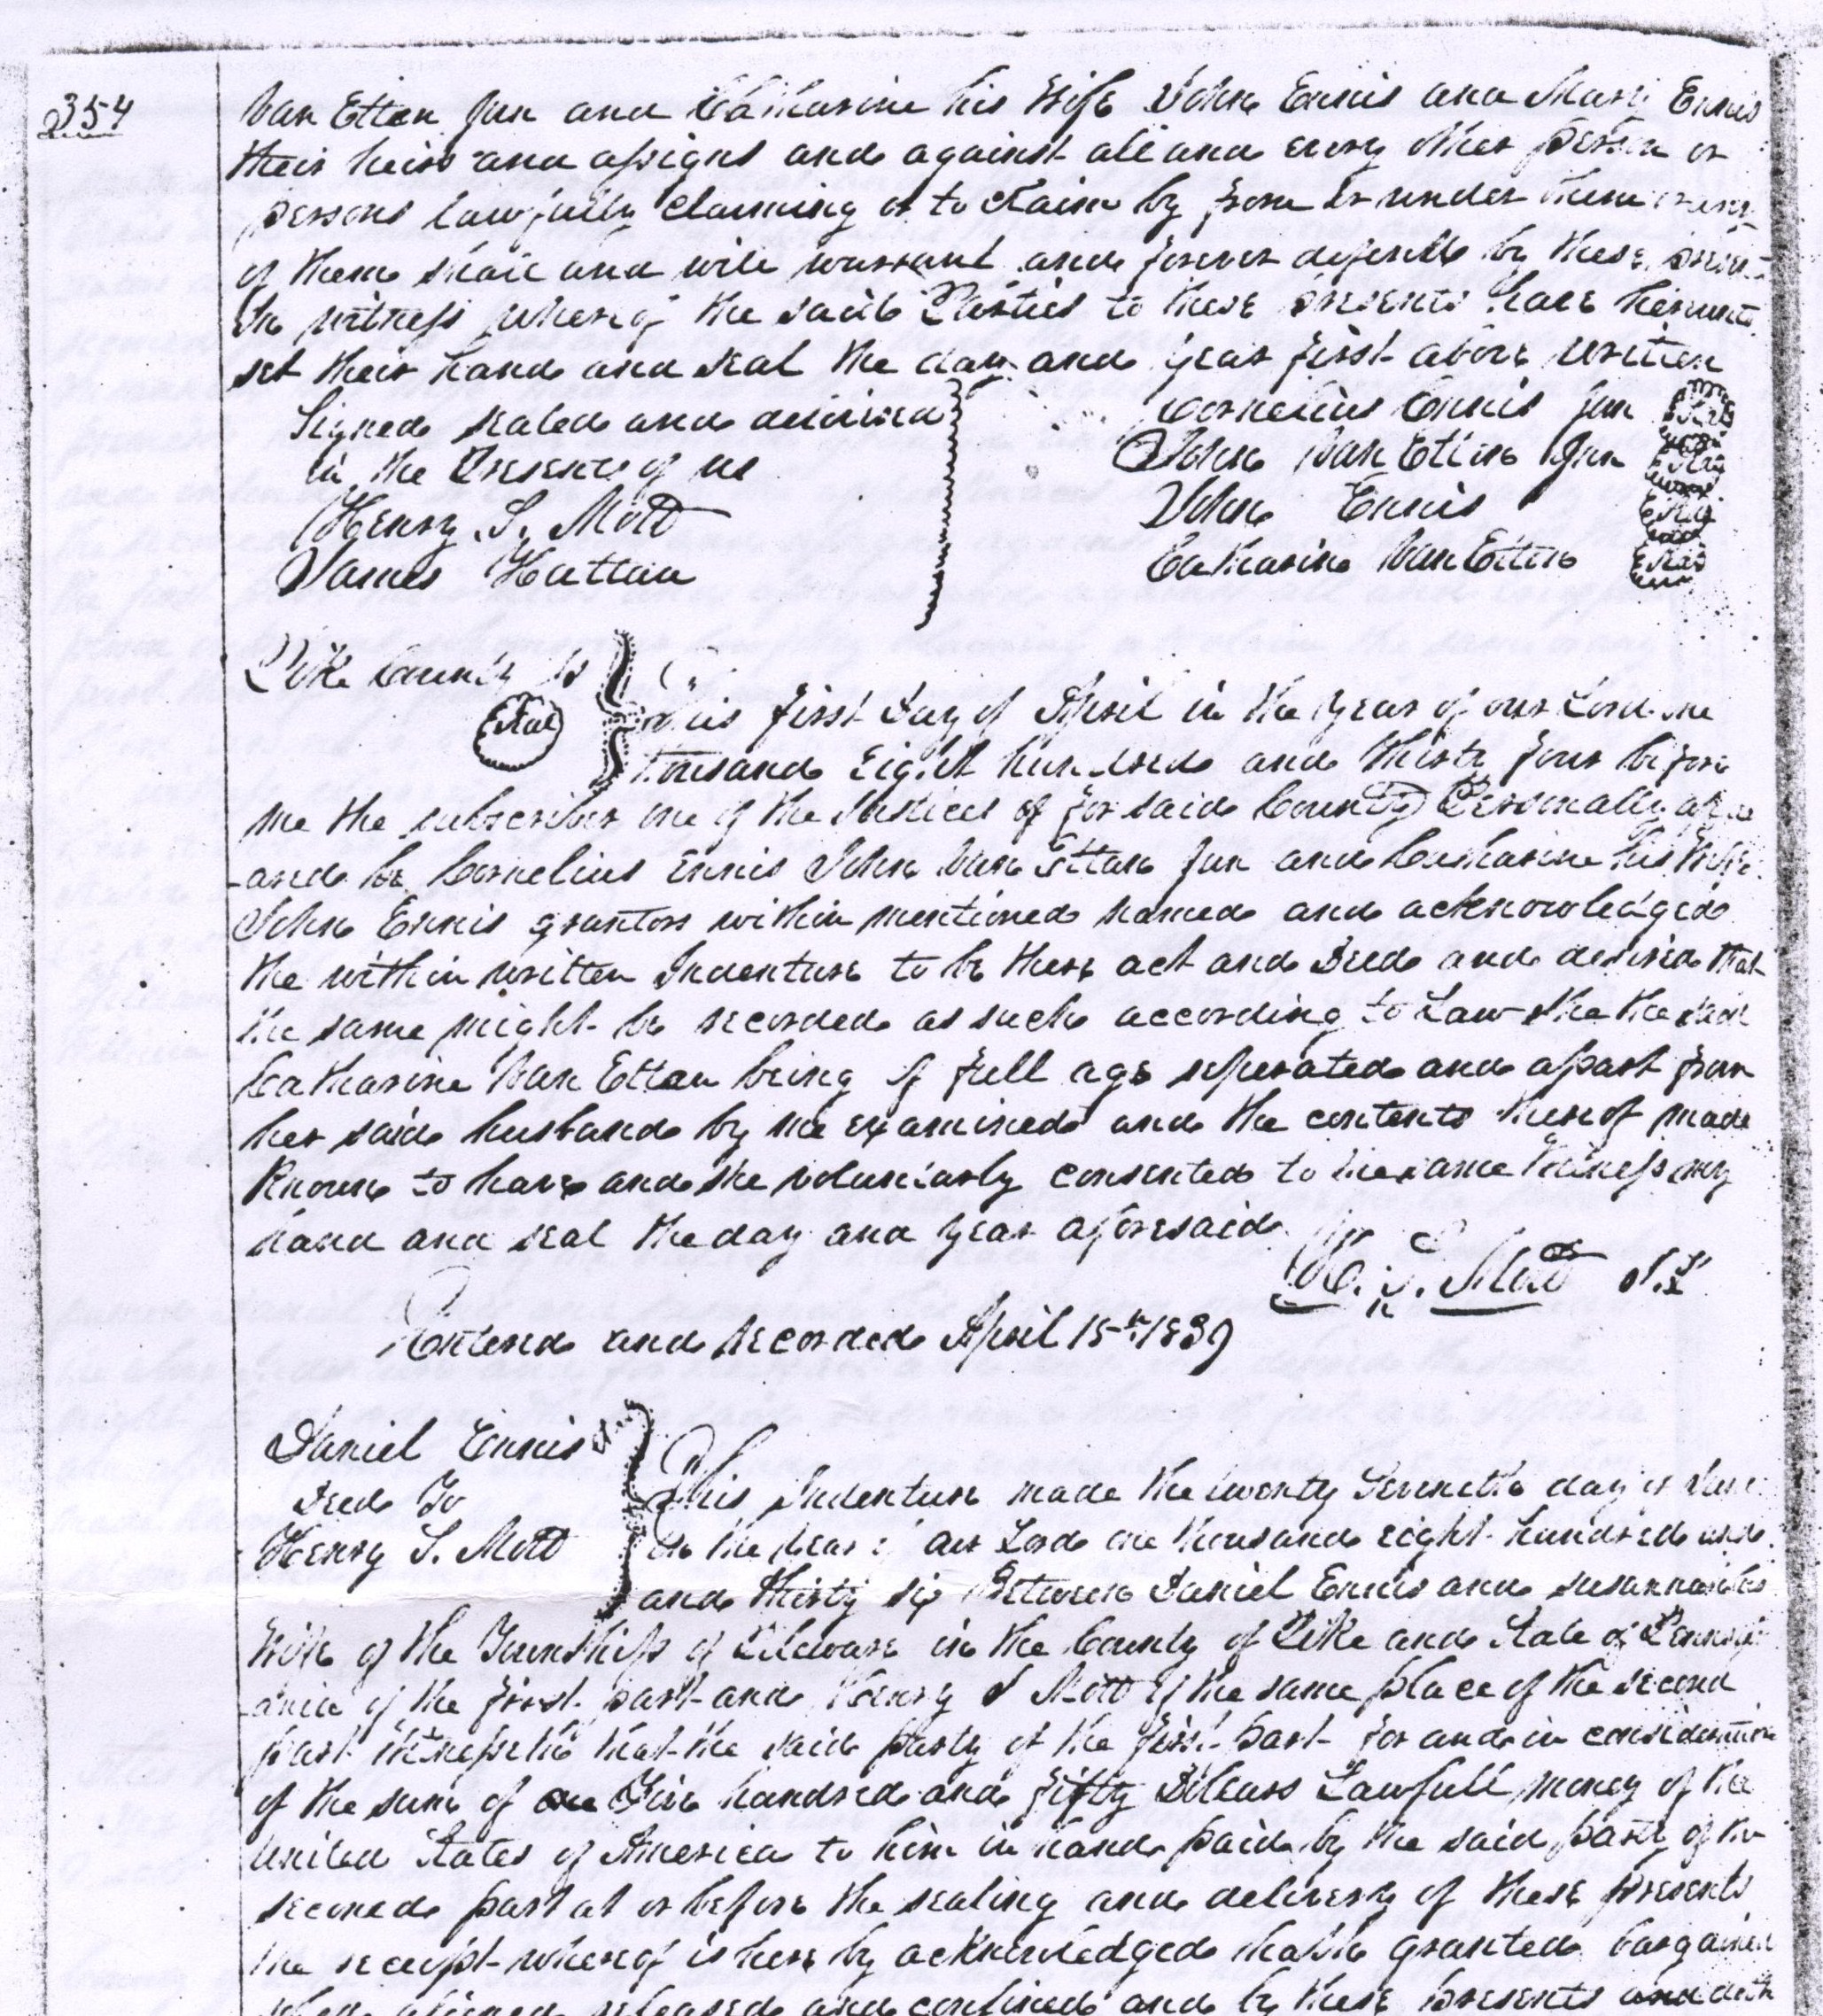 Deed related to the estate of Joseph Ennest, page 2